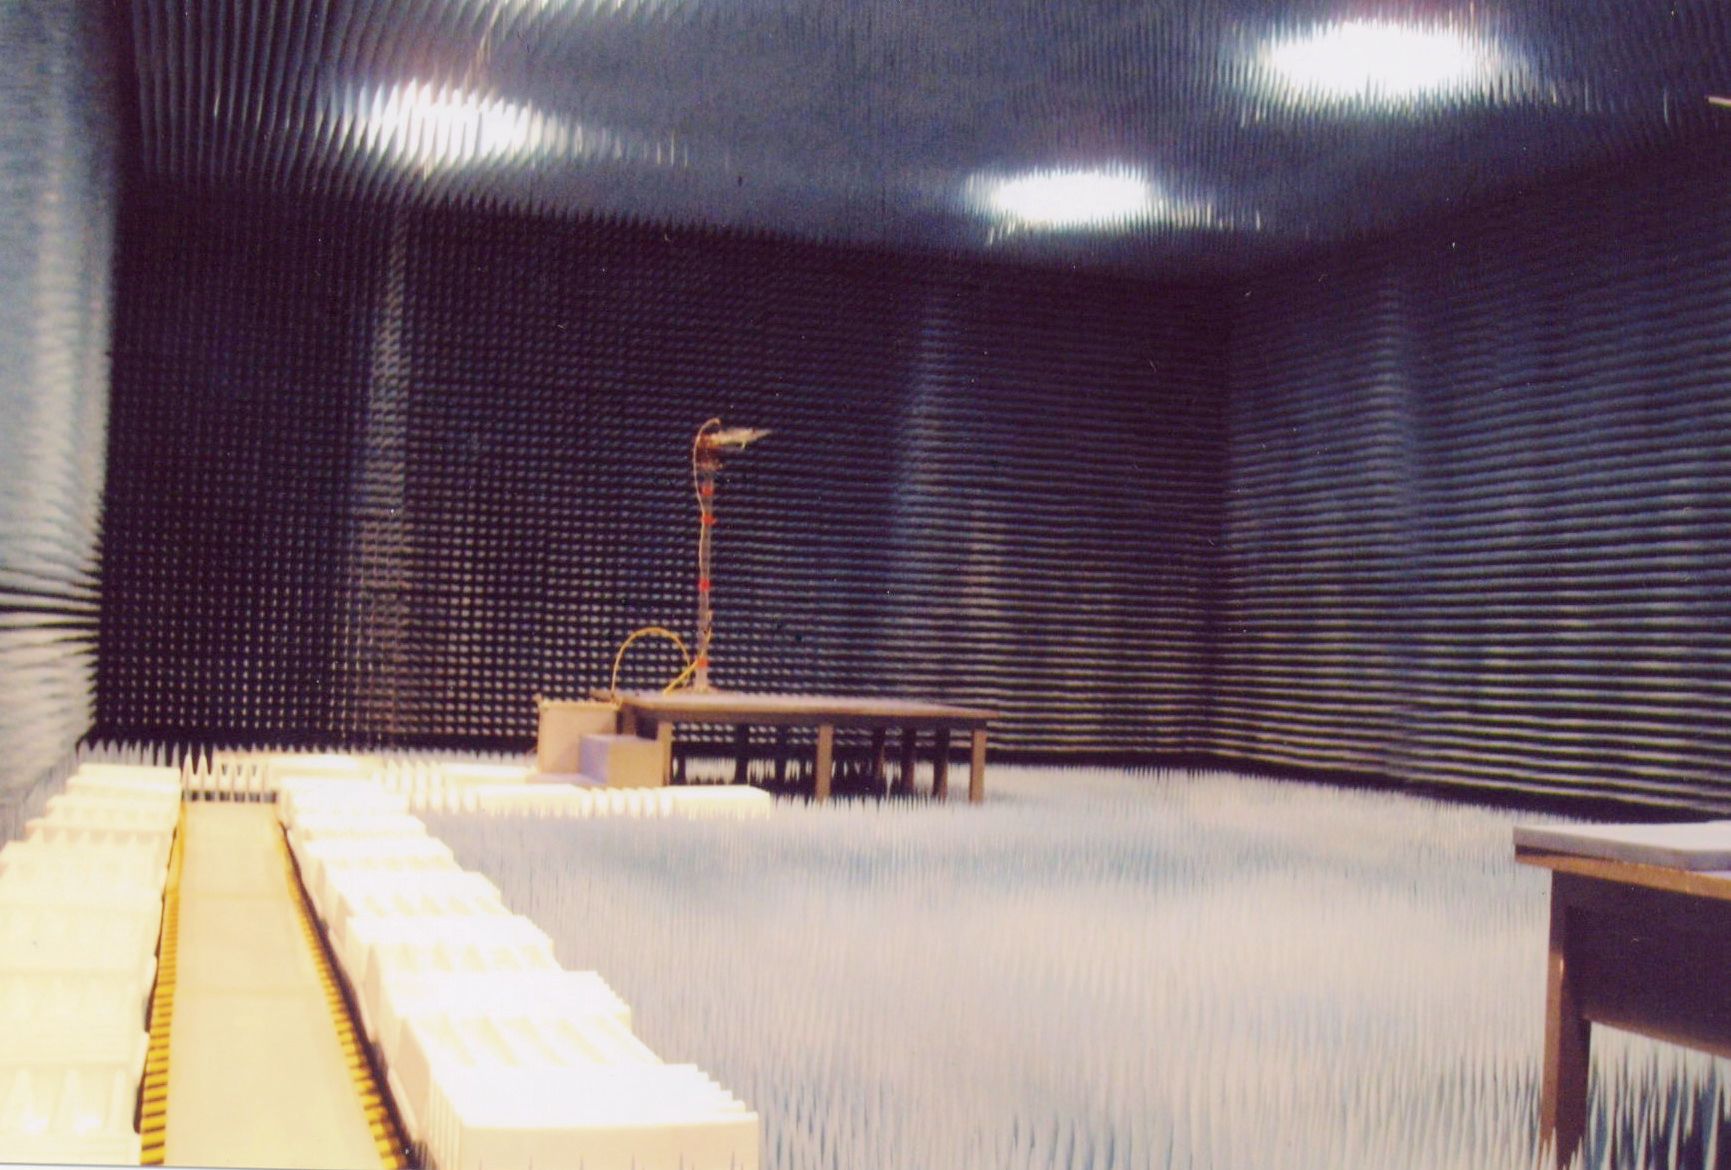 Far field microwave anechoic chamber for a Chinese university built by Nanjing Lopu Co., Ltd.